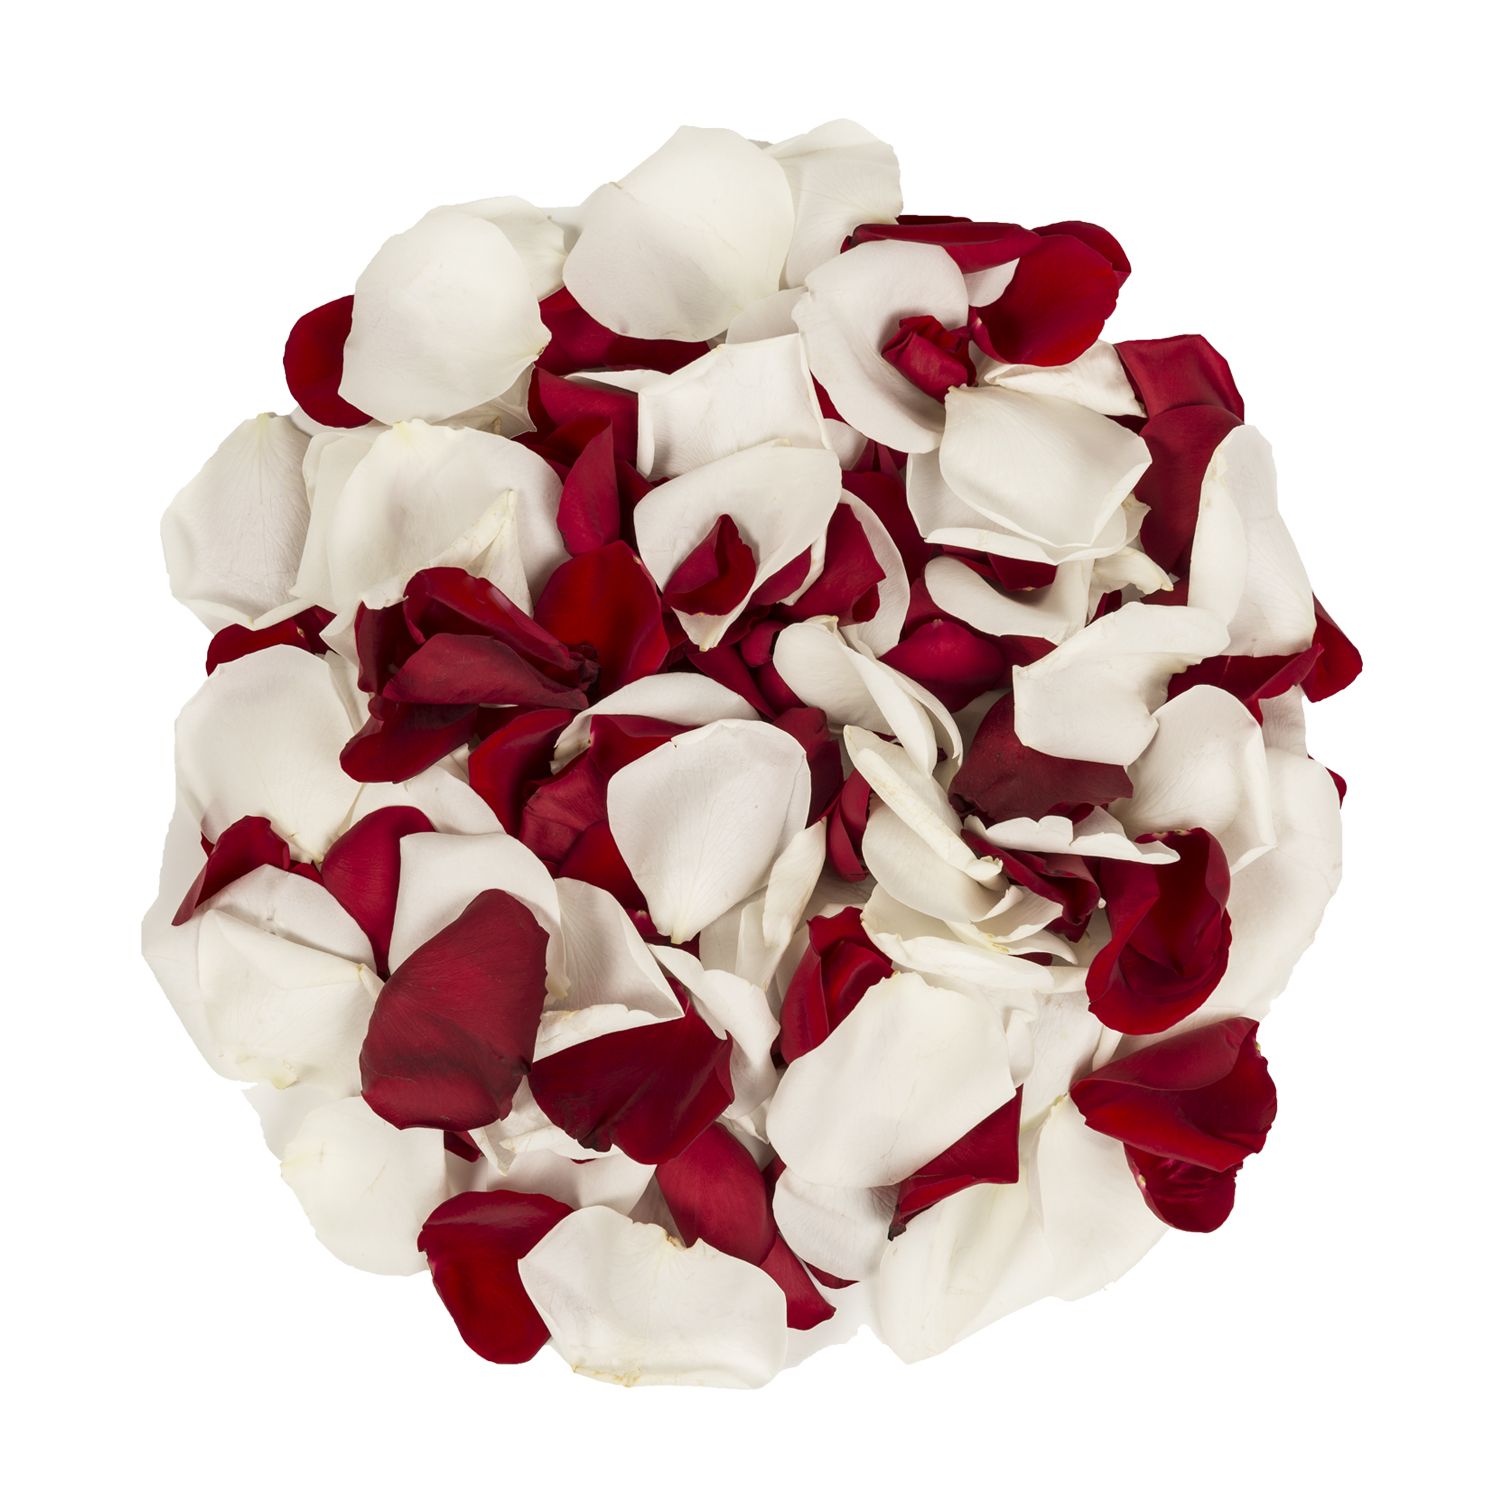 GlobalRose 5000 Fresh Red Rose Petals - Real Petals with Fast Delivery -  Perfect for Valentine´s Day